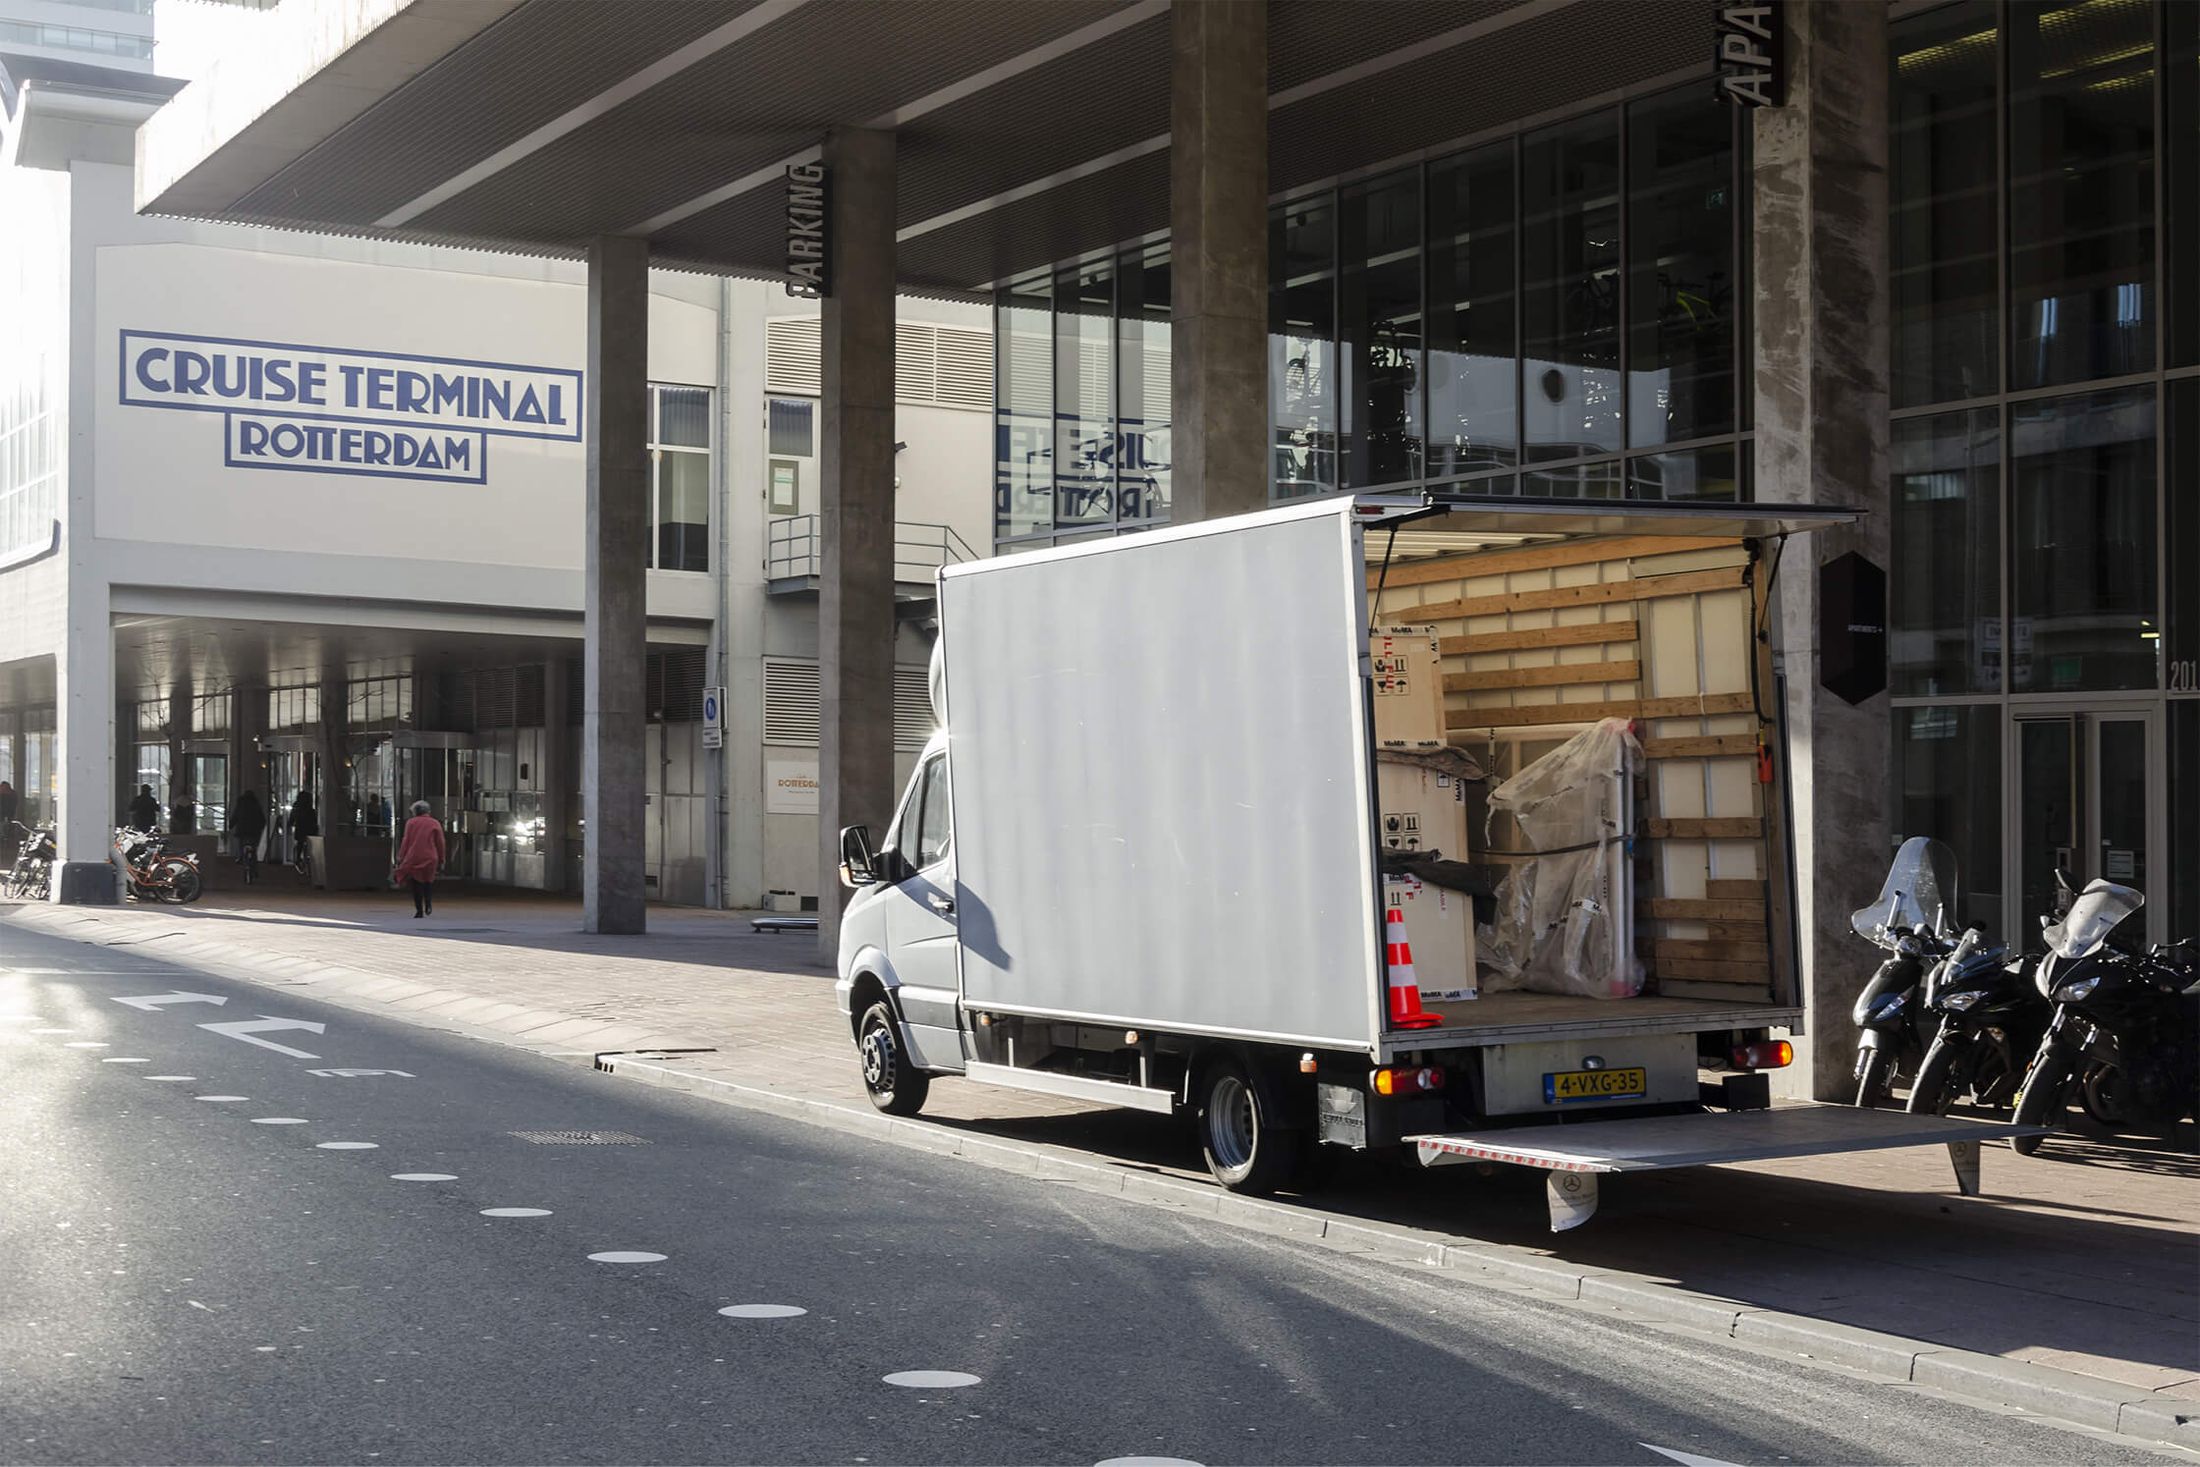 Exhibition Continues (2019) by Melle Nieling, a truck with art shipping crates is standing by the Cruise Terminal in Rotterdam during Art Rotterdam 2019